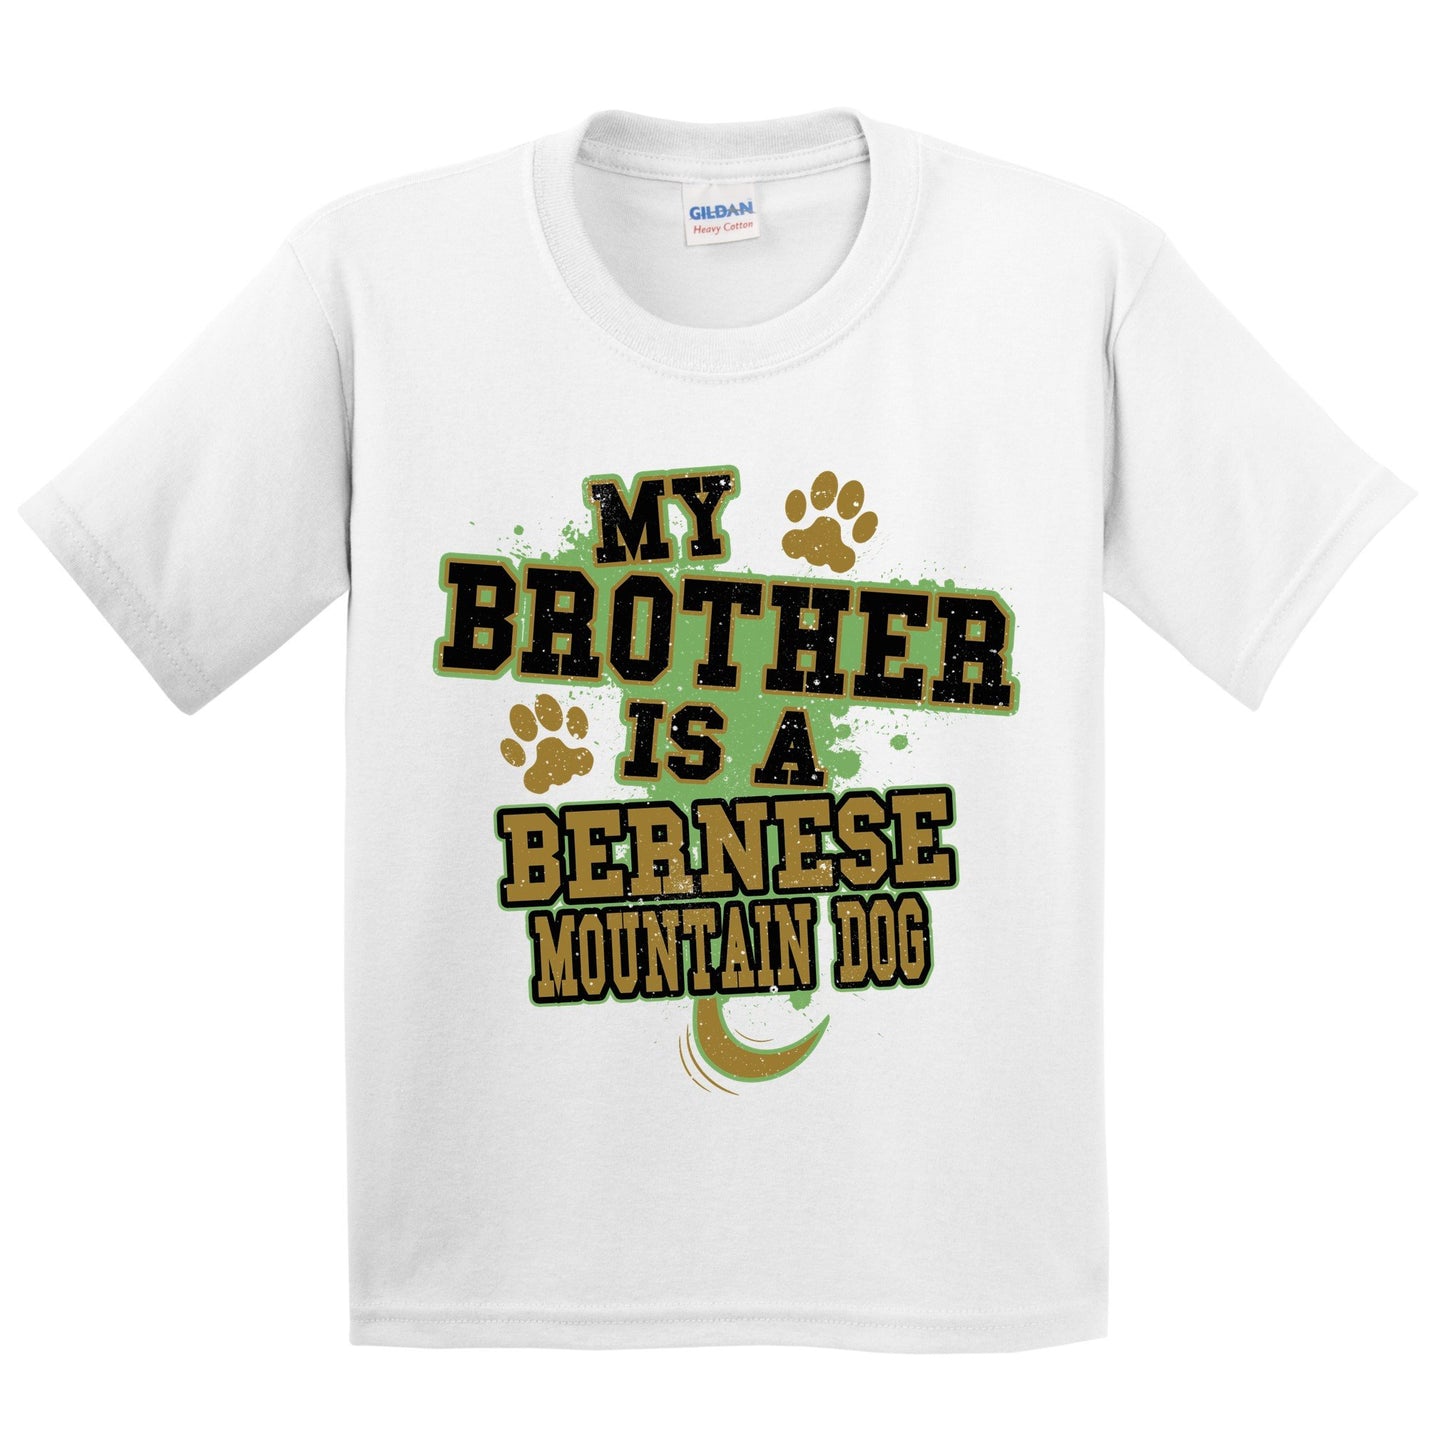 My Brother Is A Bernese Mountain Dog Funny Dog Kids Youth T-Shirt